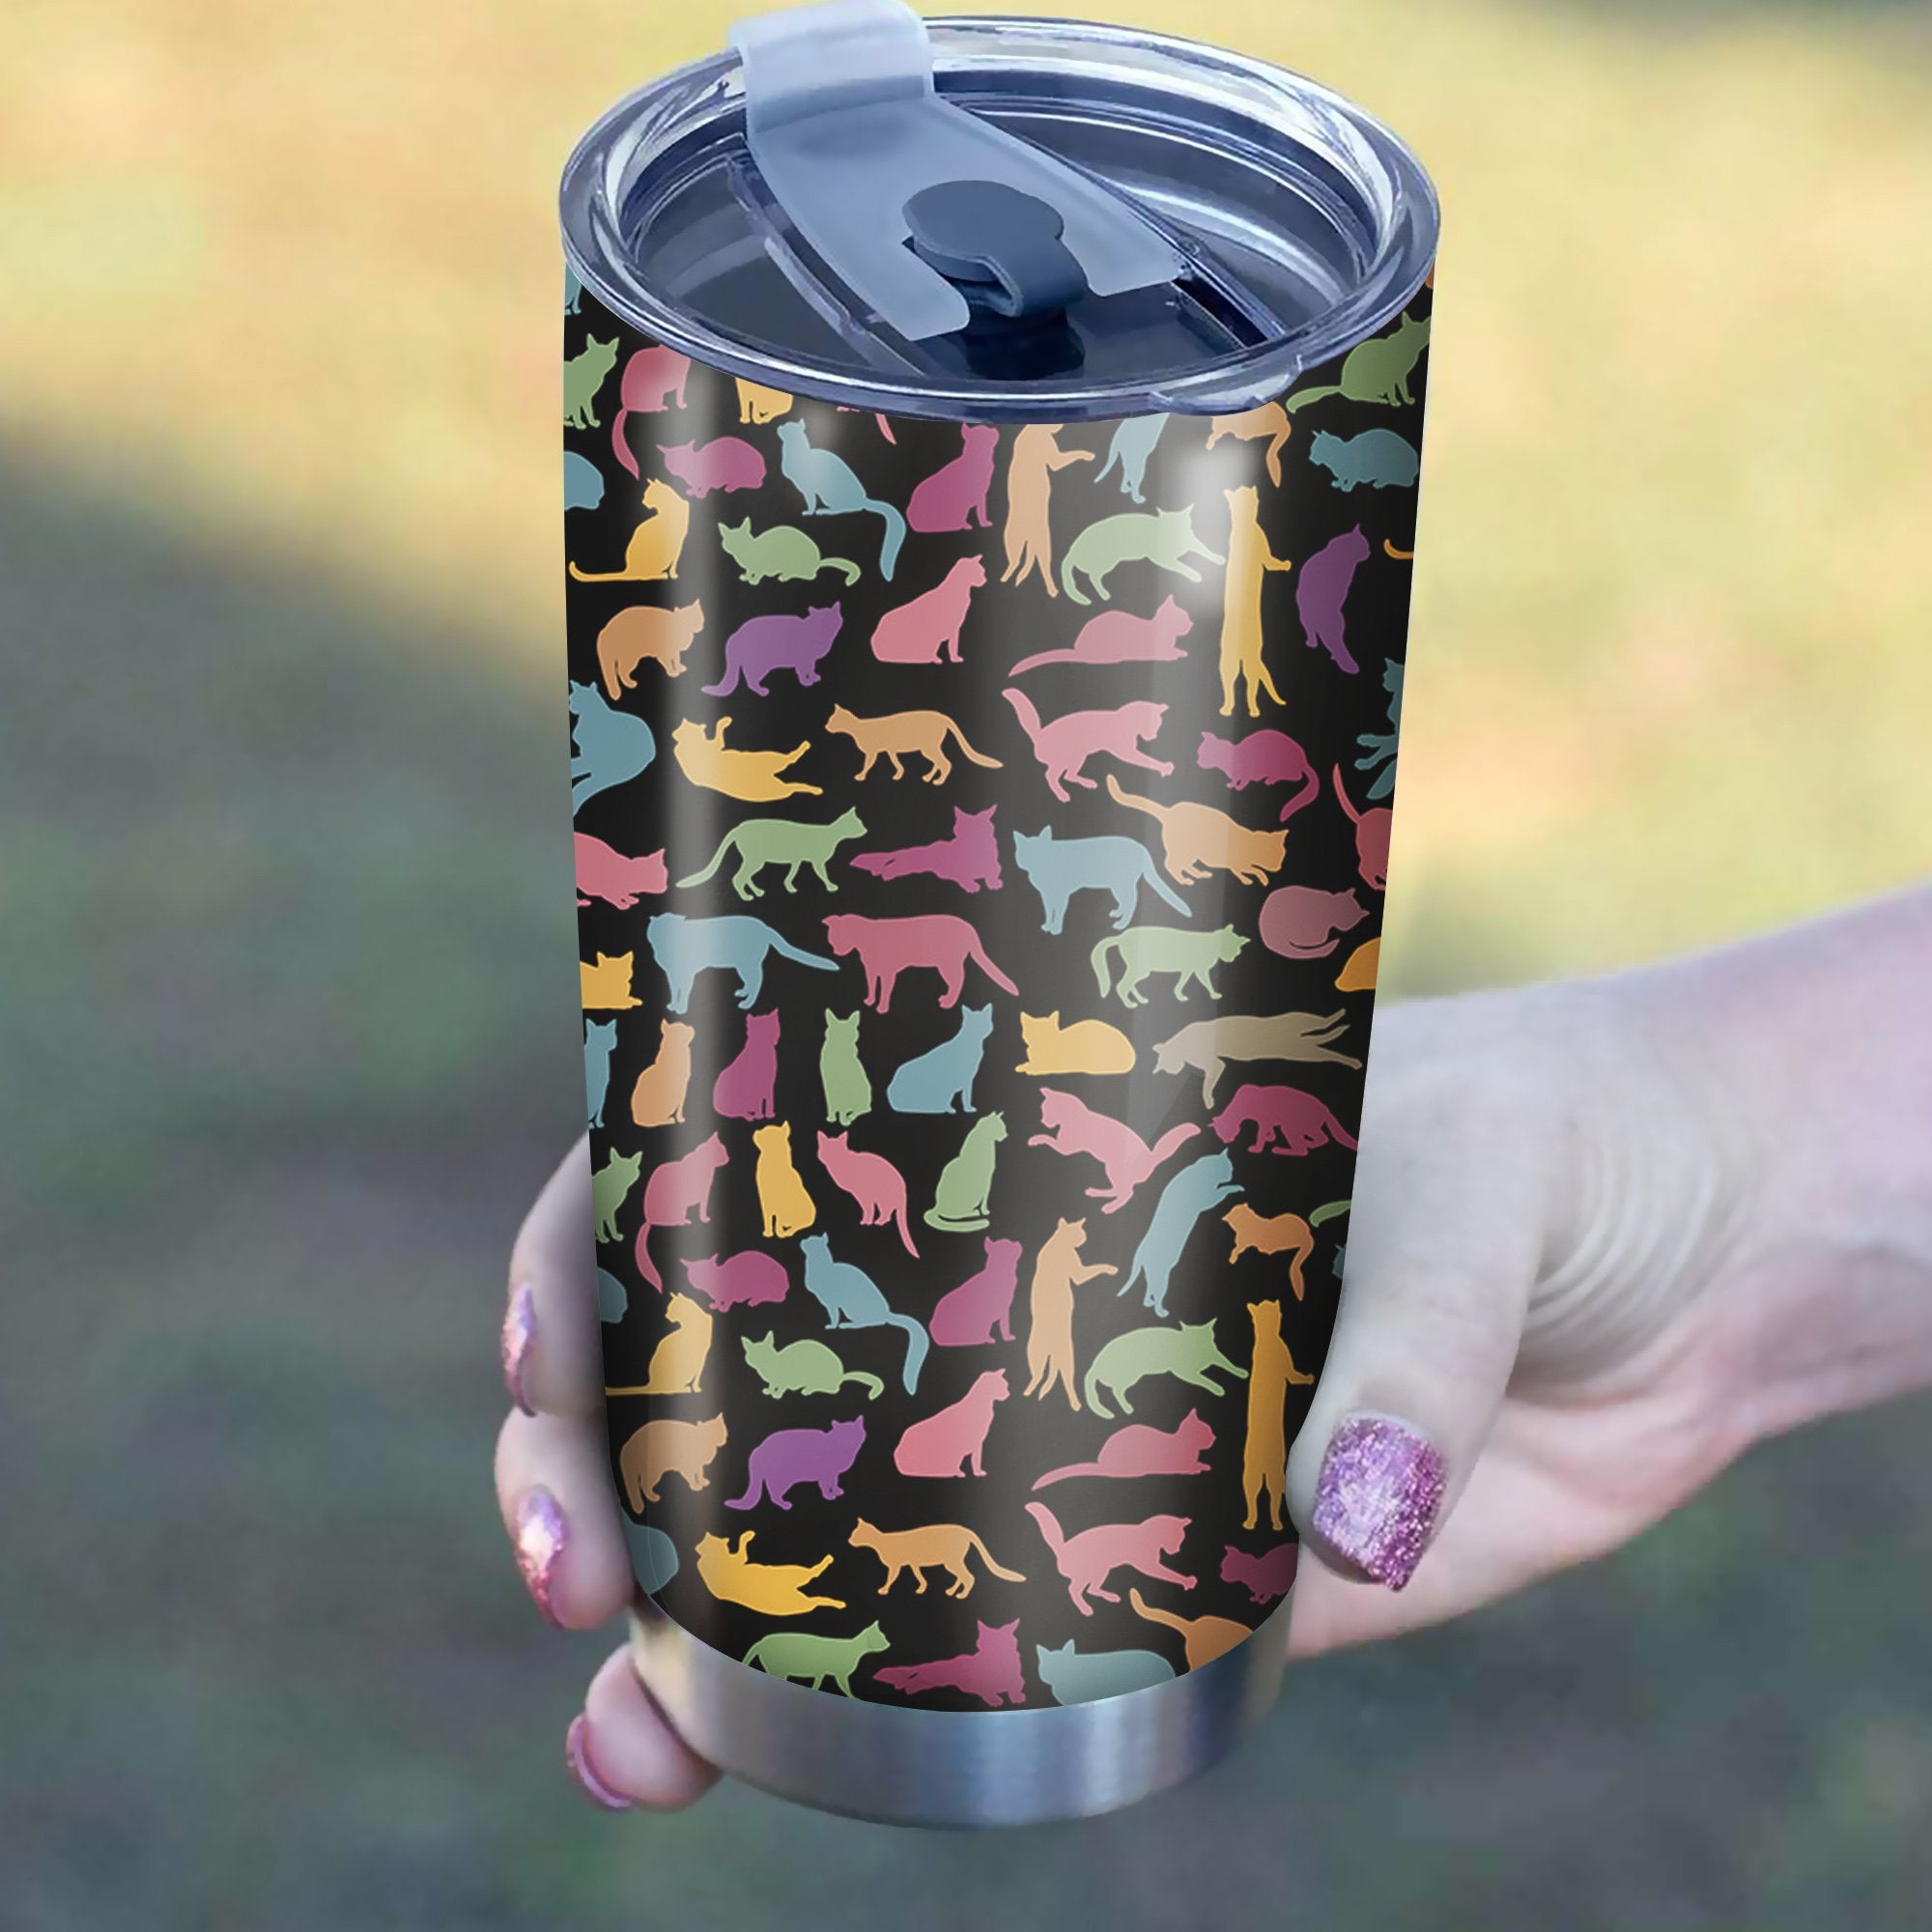 Cats Pattern Tumbler Best Perfect Gift Idea Stainless Traveling Mugs 2021